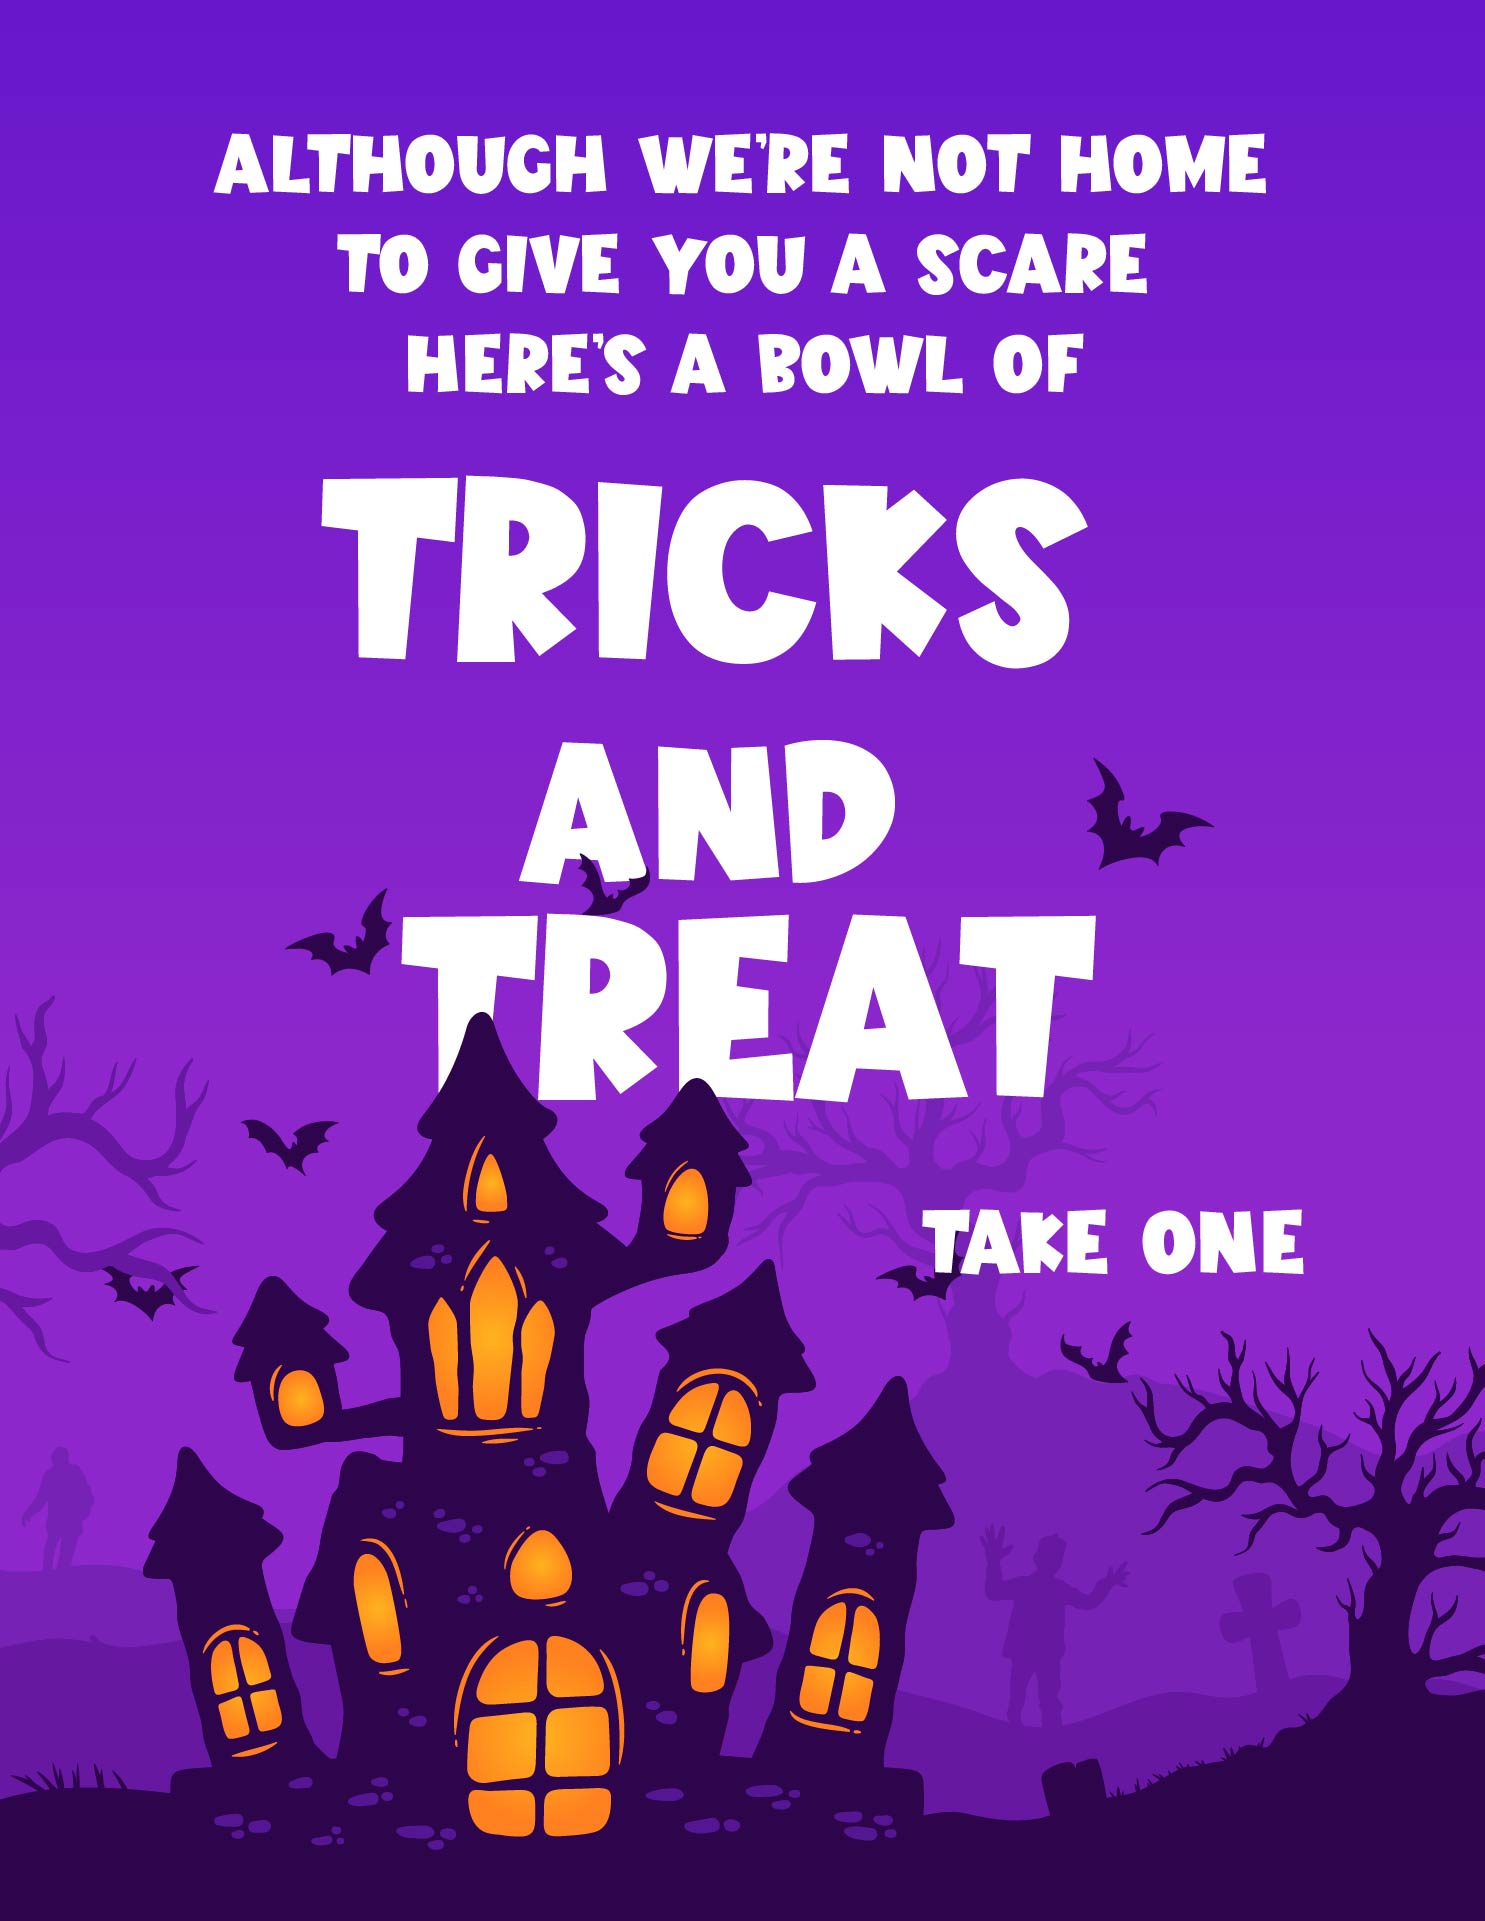 Printable Sign With Halloween Poem For Trick Or Treaters